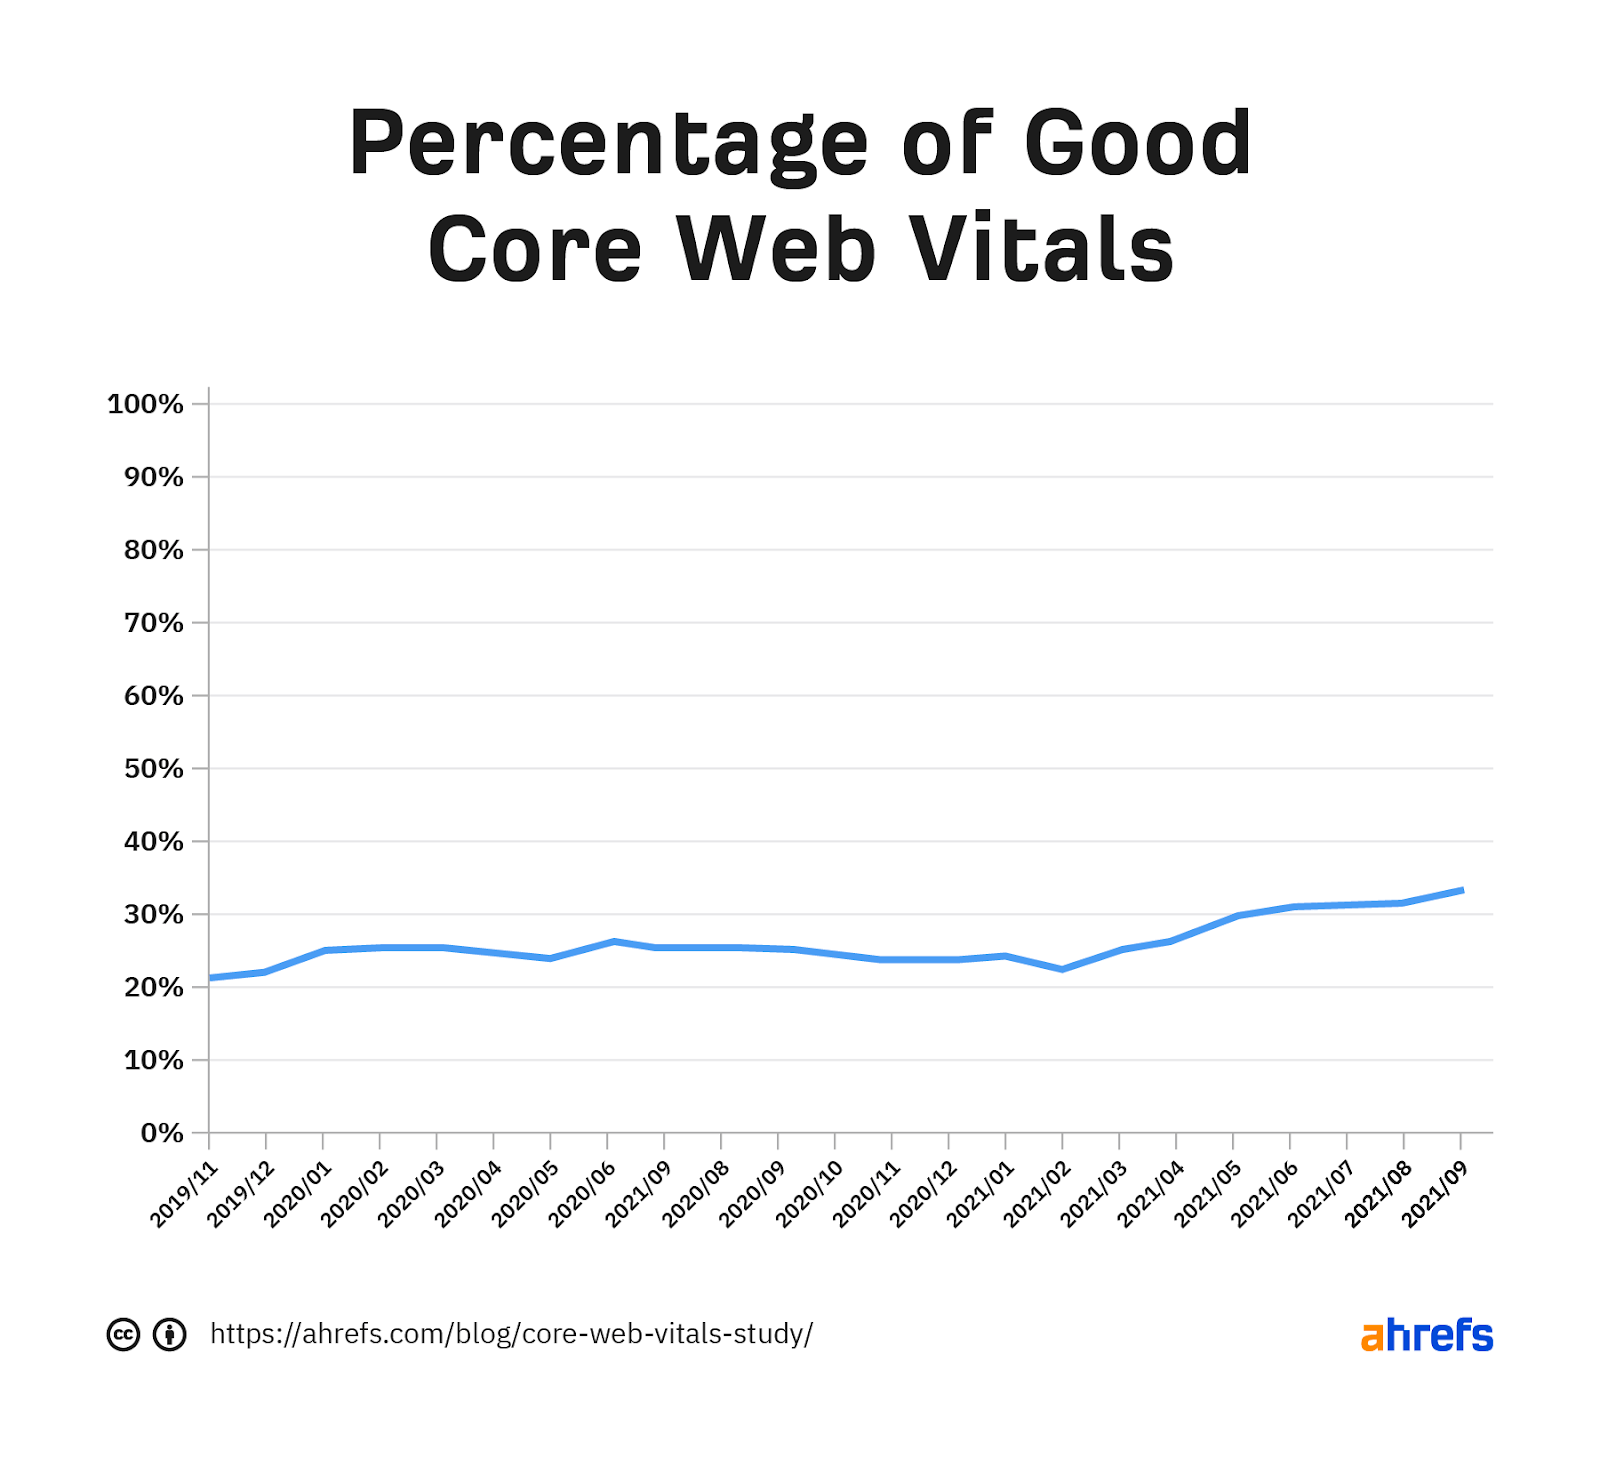 Chart showing the percentage of good Core Web Vital over time